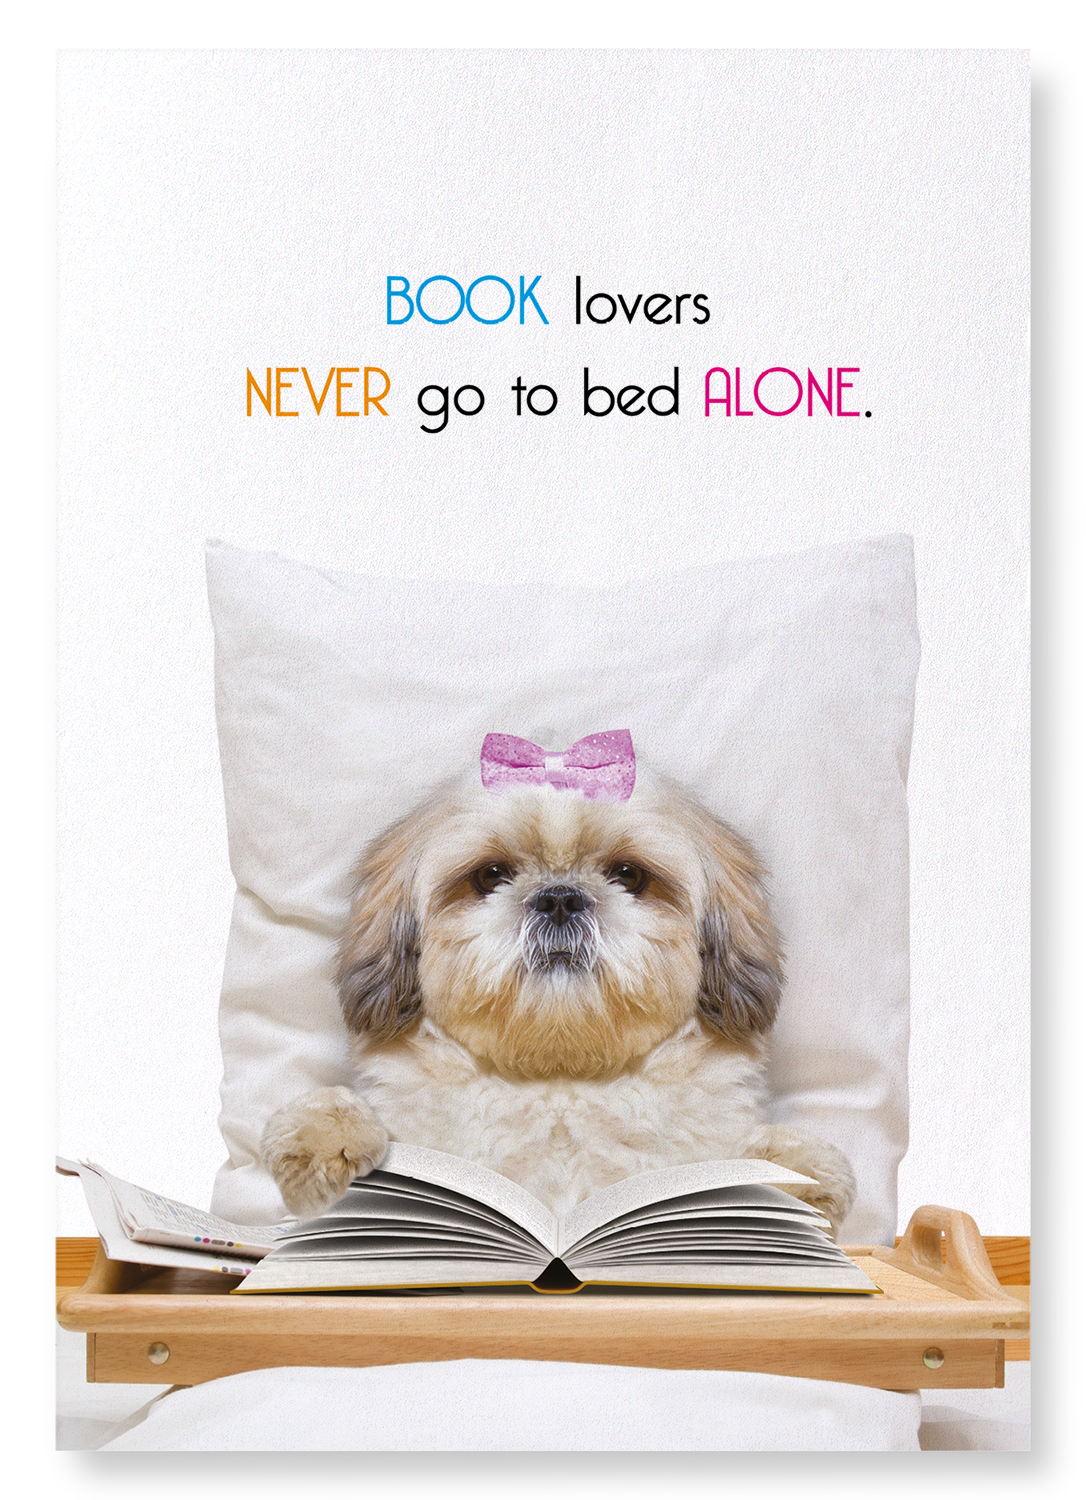 BOOK LOVERS IN BED: Funny Animal Art print